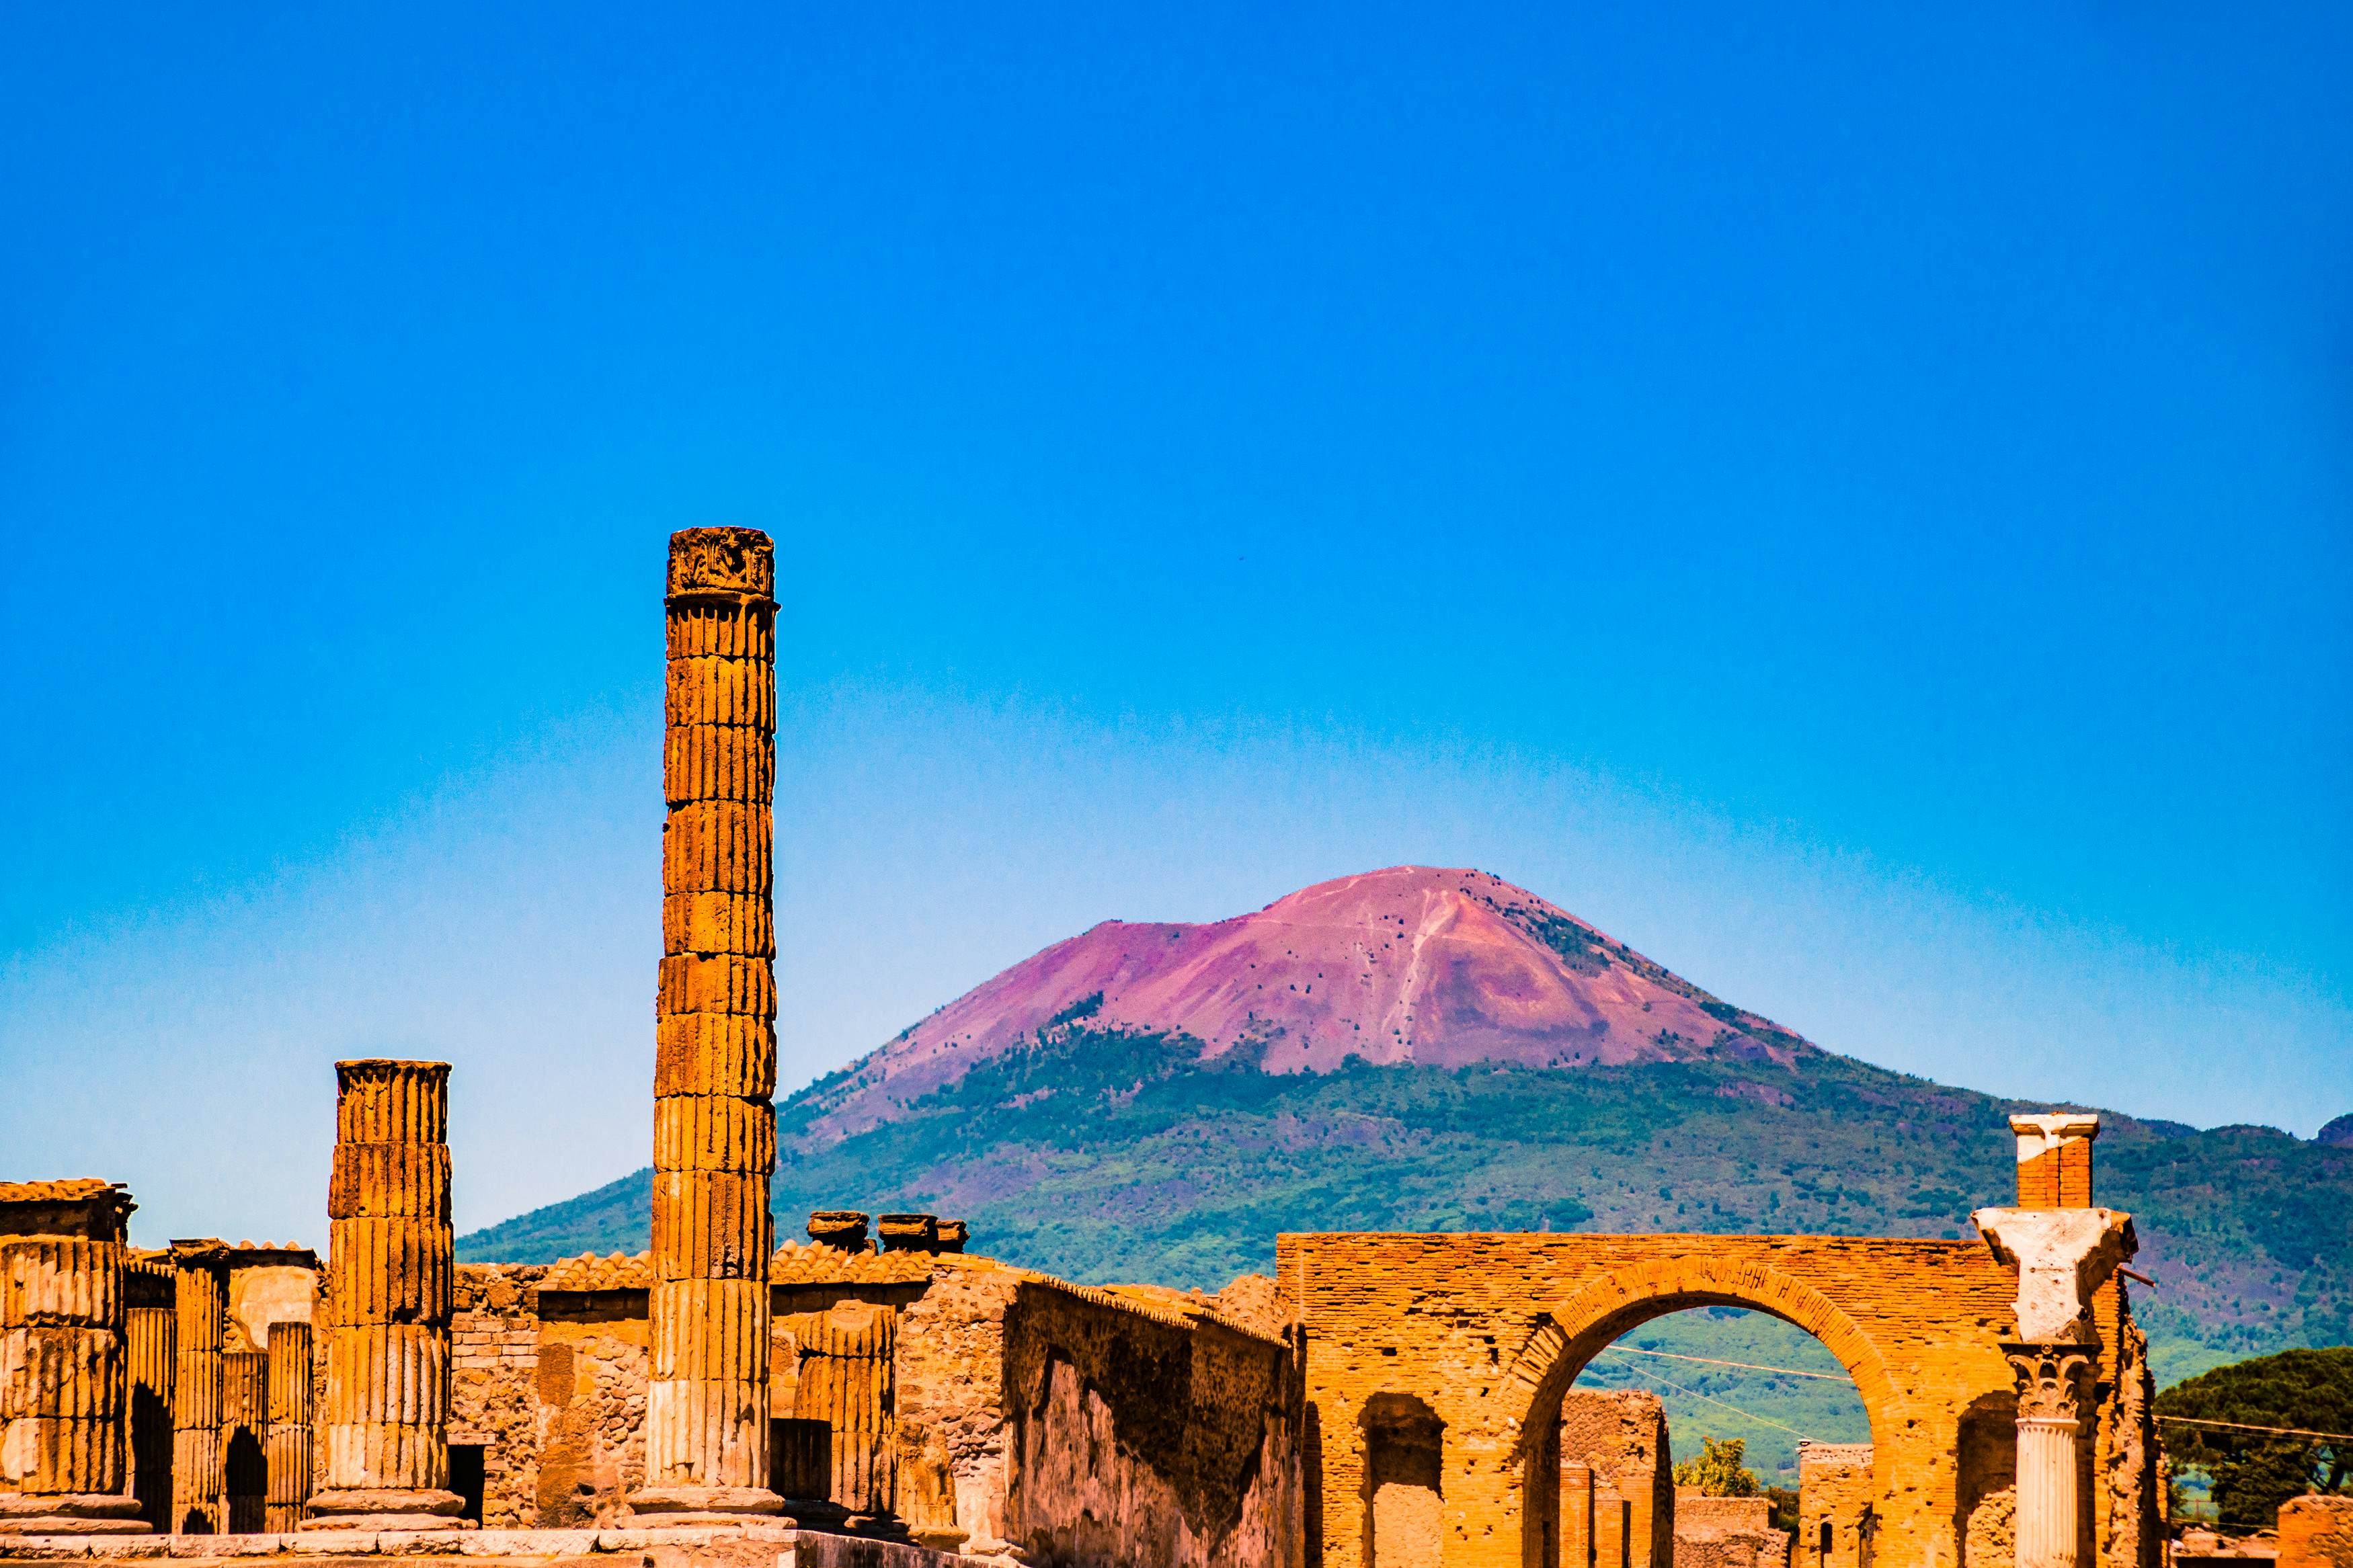 Get to know Pompeii, Italy's legendary ruined city - Lonely Planet